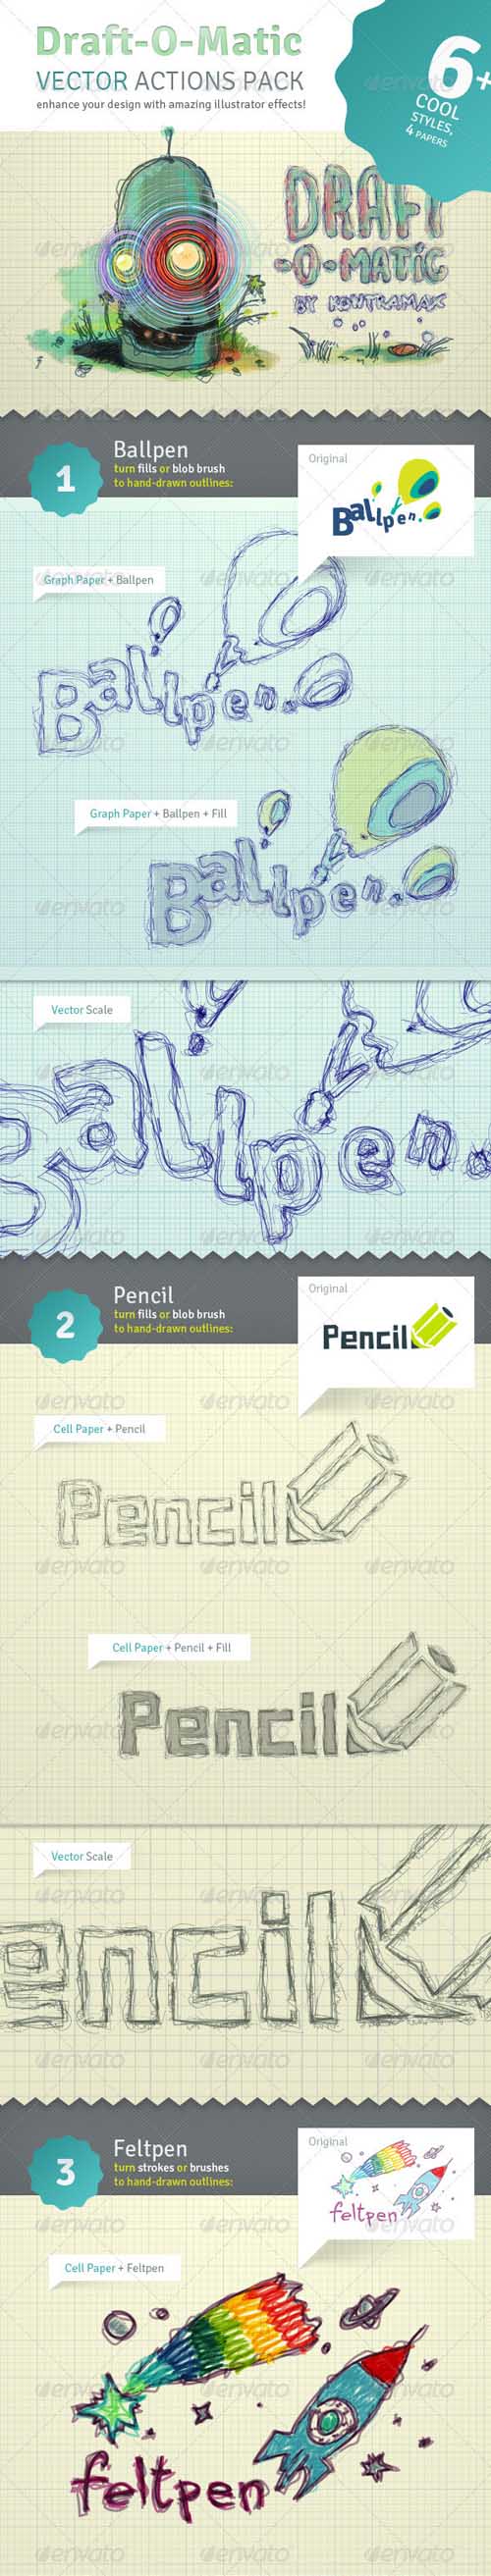 GraphicRiver Draft-O-Matic Sketchbook - Vector Actions Pack